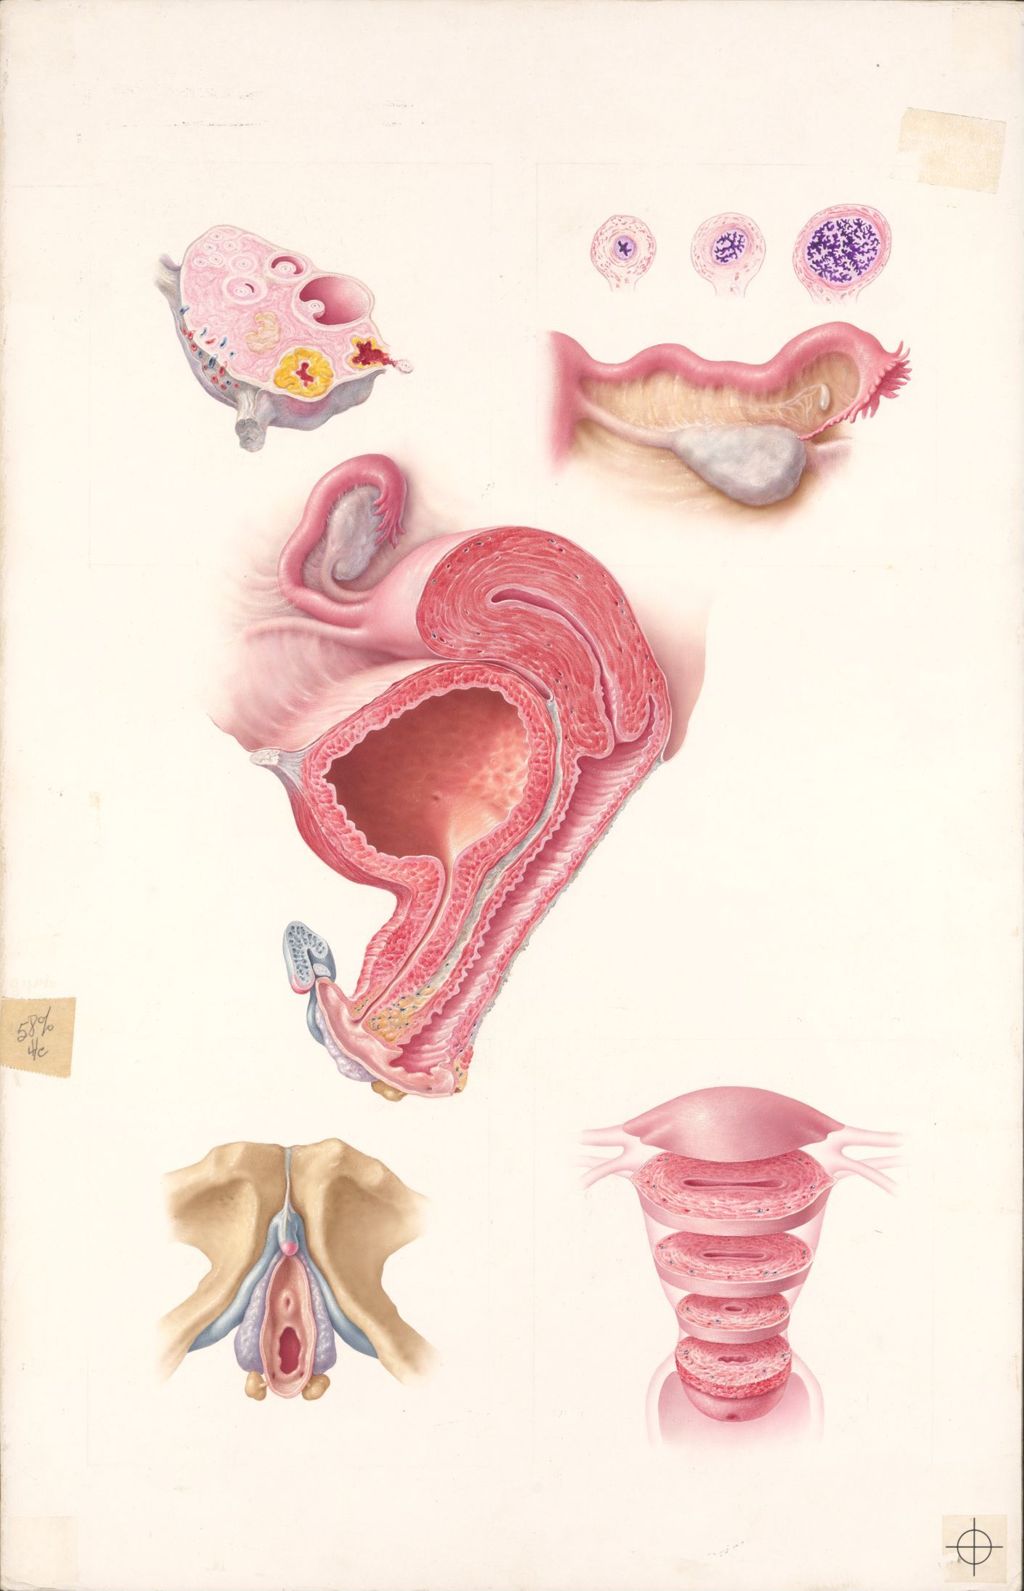 Miniature of The Female Urogenital Tract, Plate II, Midsagittal Section Through the Female Pelvic Viscera, as seen from the left